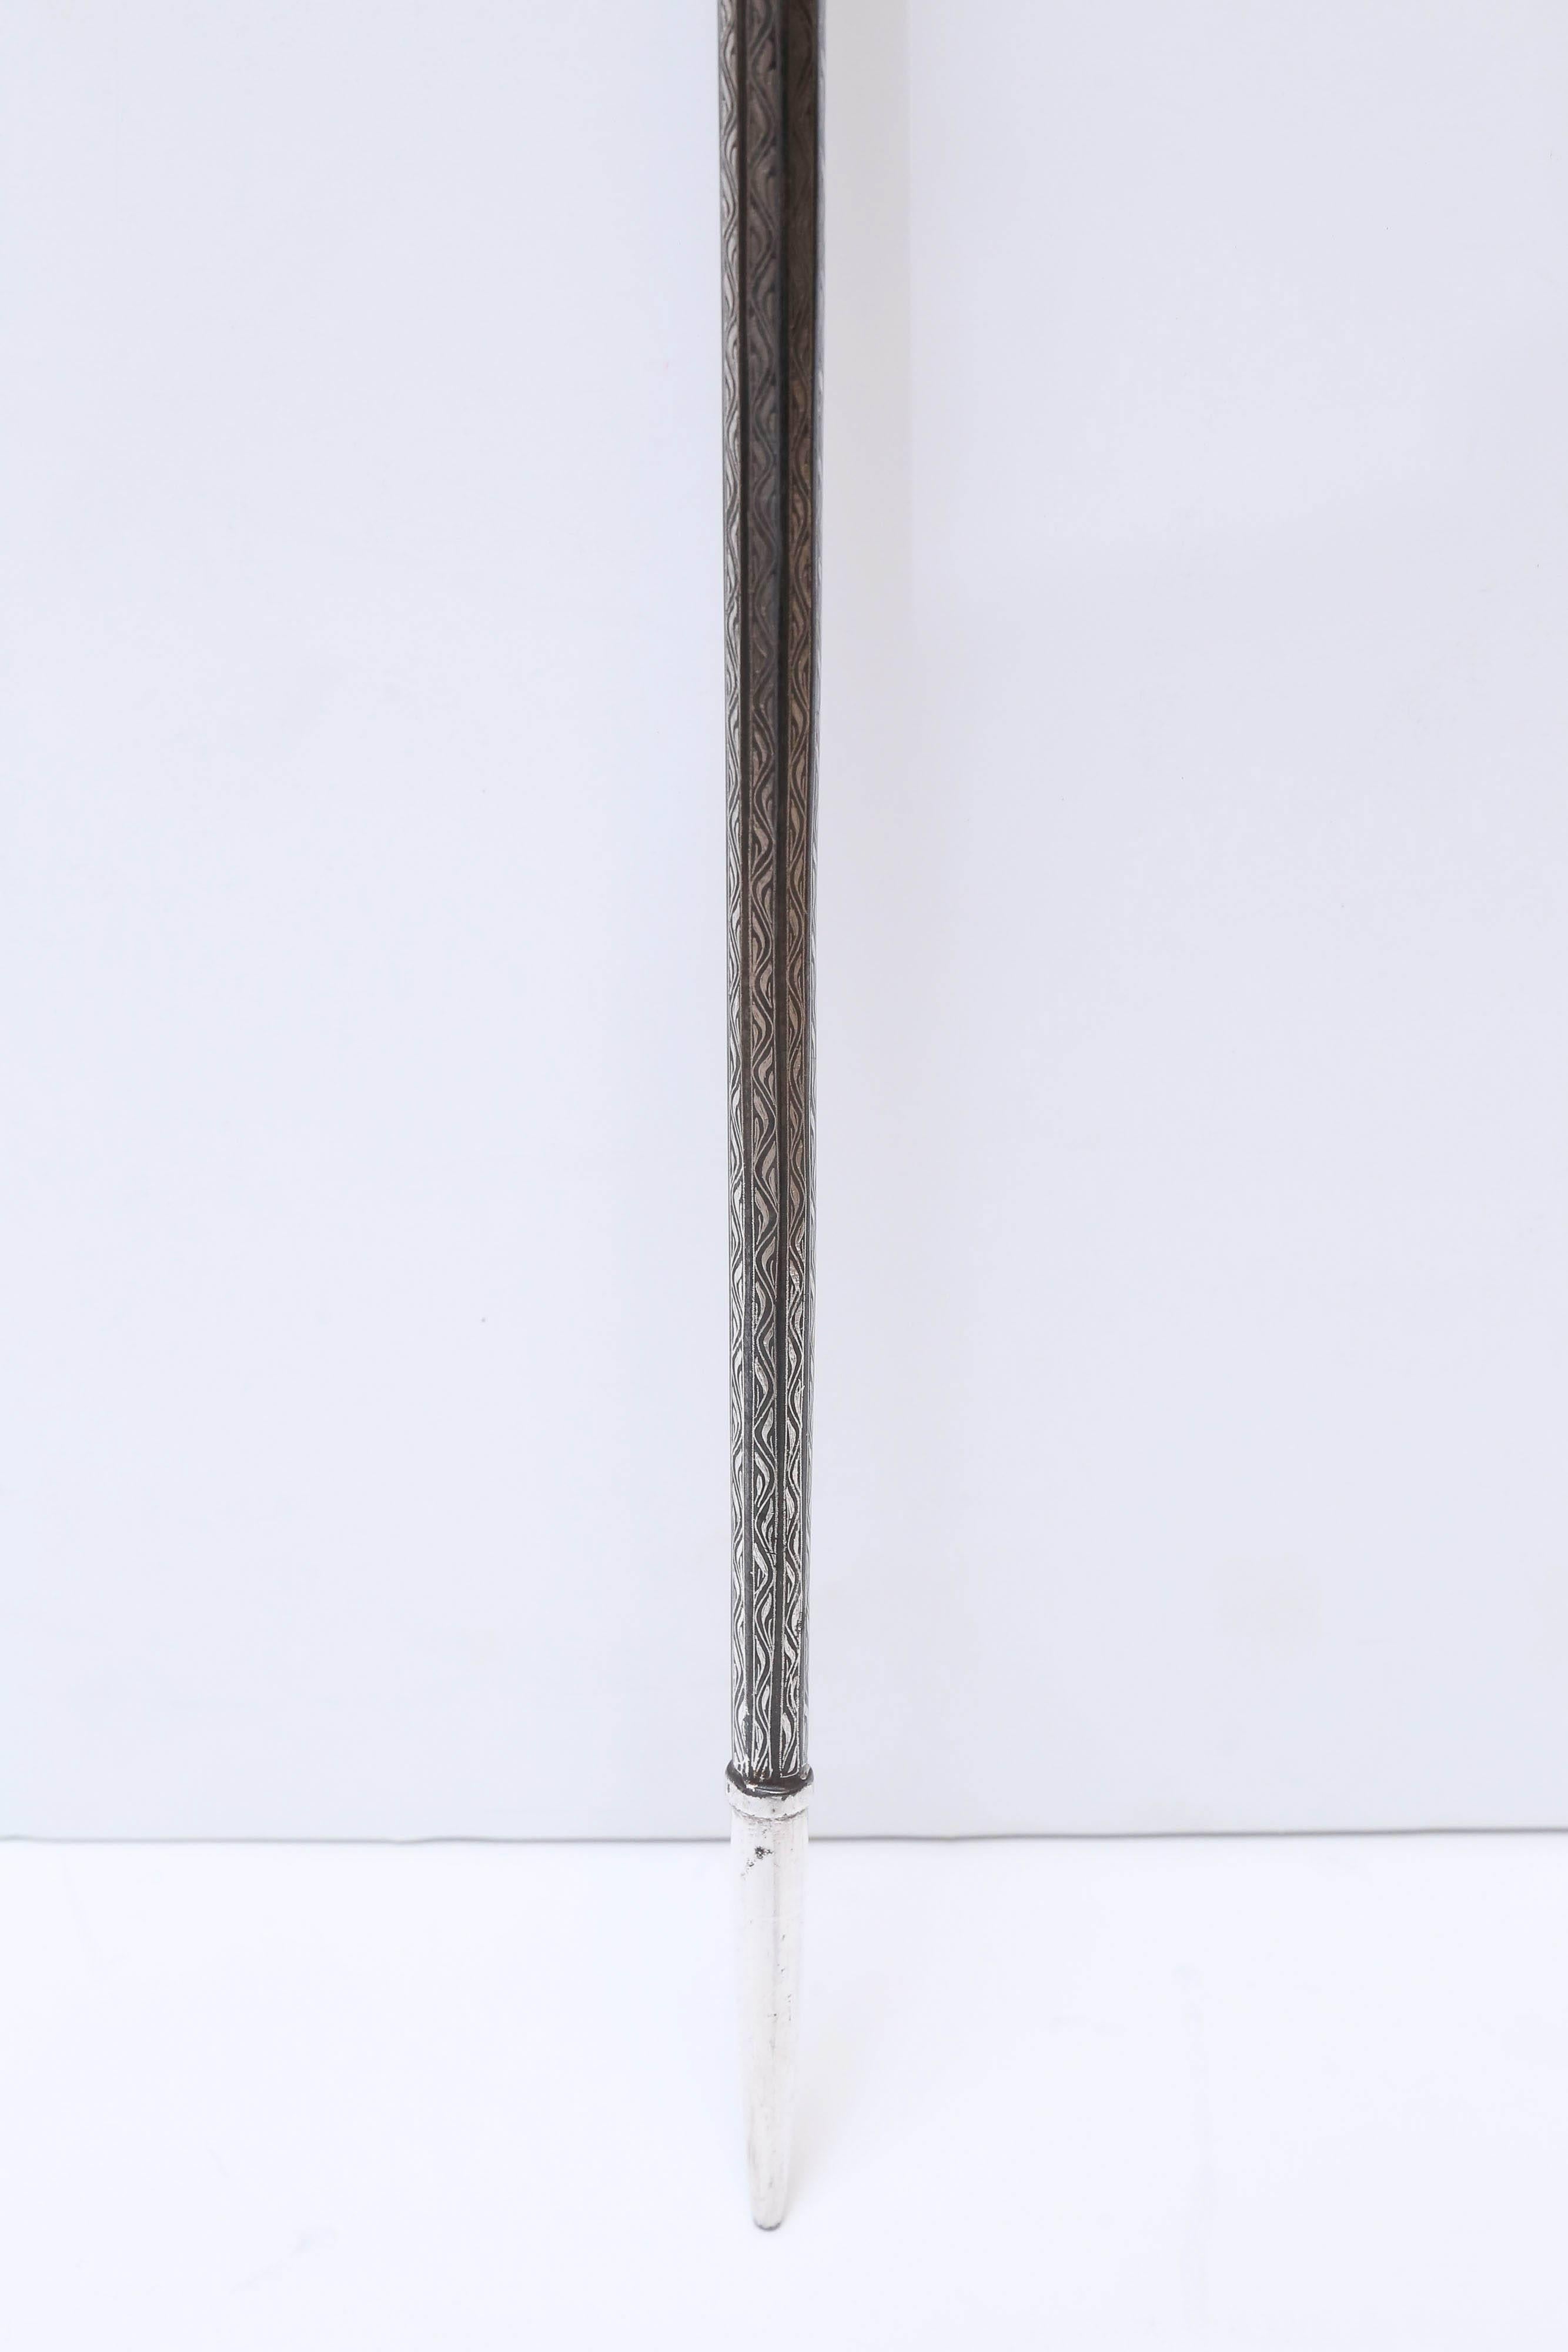 Indian Early 20th Century Iron Walking Stick with Museum Quality Silver Filigree Work